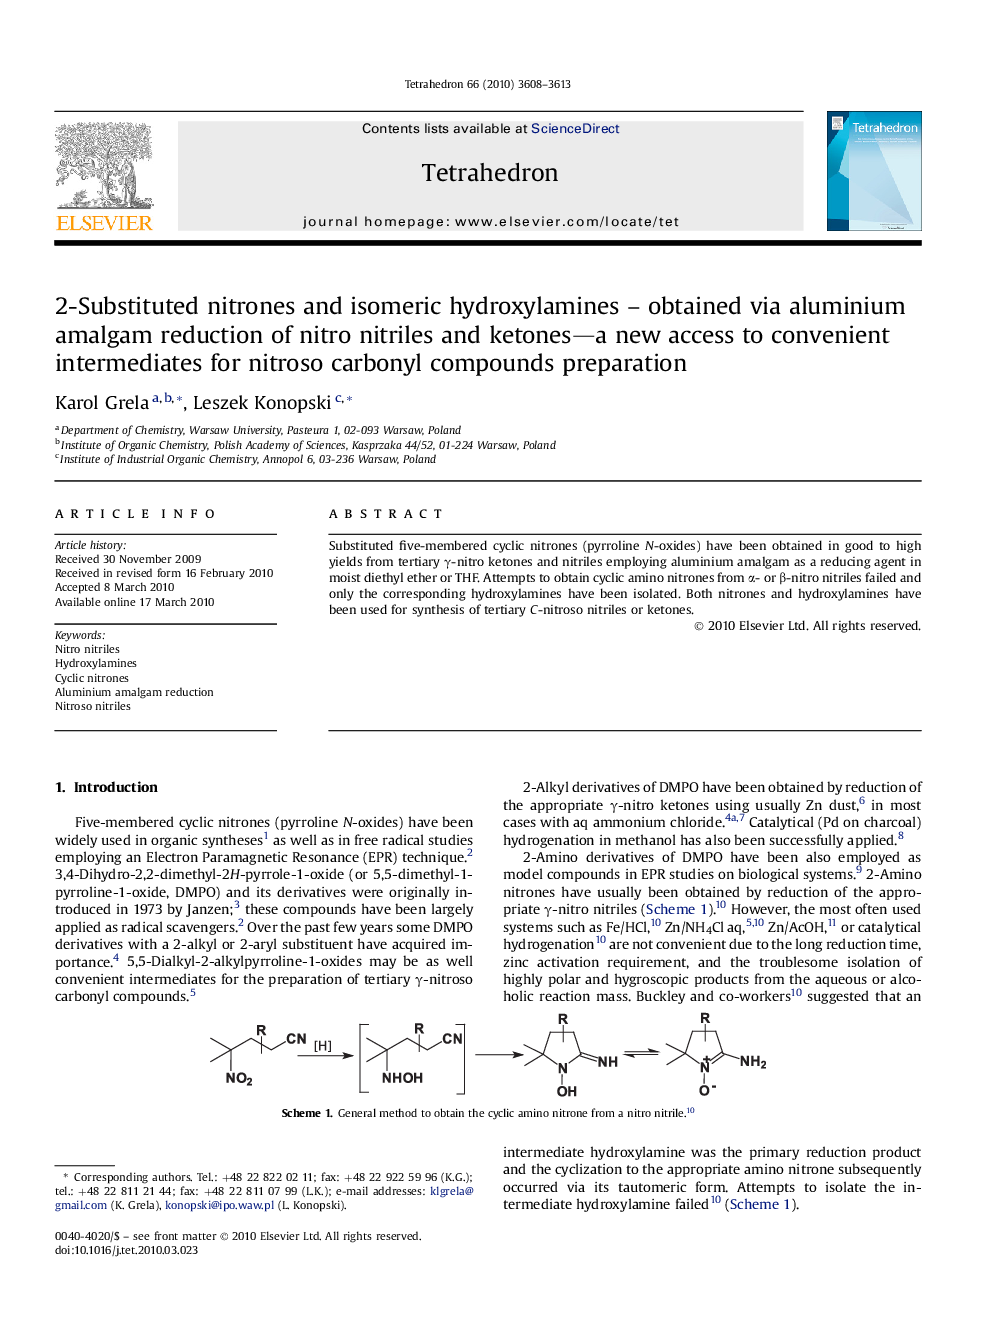 2-Substituted nitrones and isomeric hydroxylamines - obtained via aluminium amalgam reduction of nitro nitriles and ketones-a new access to convenient intermediates for nitroso carbonyl compounds preparation